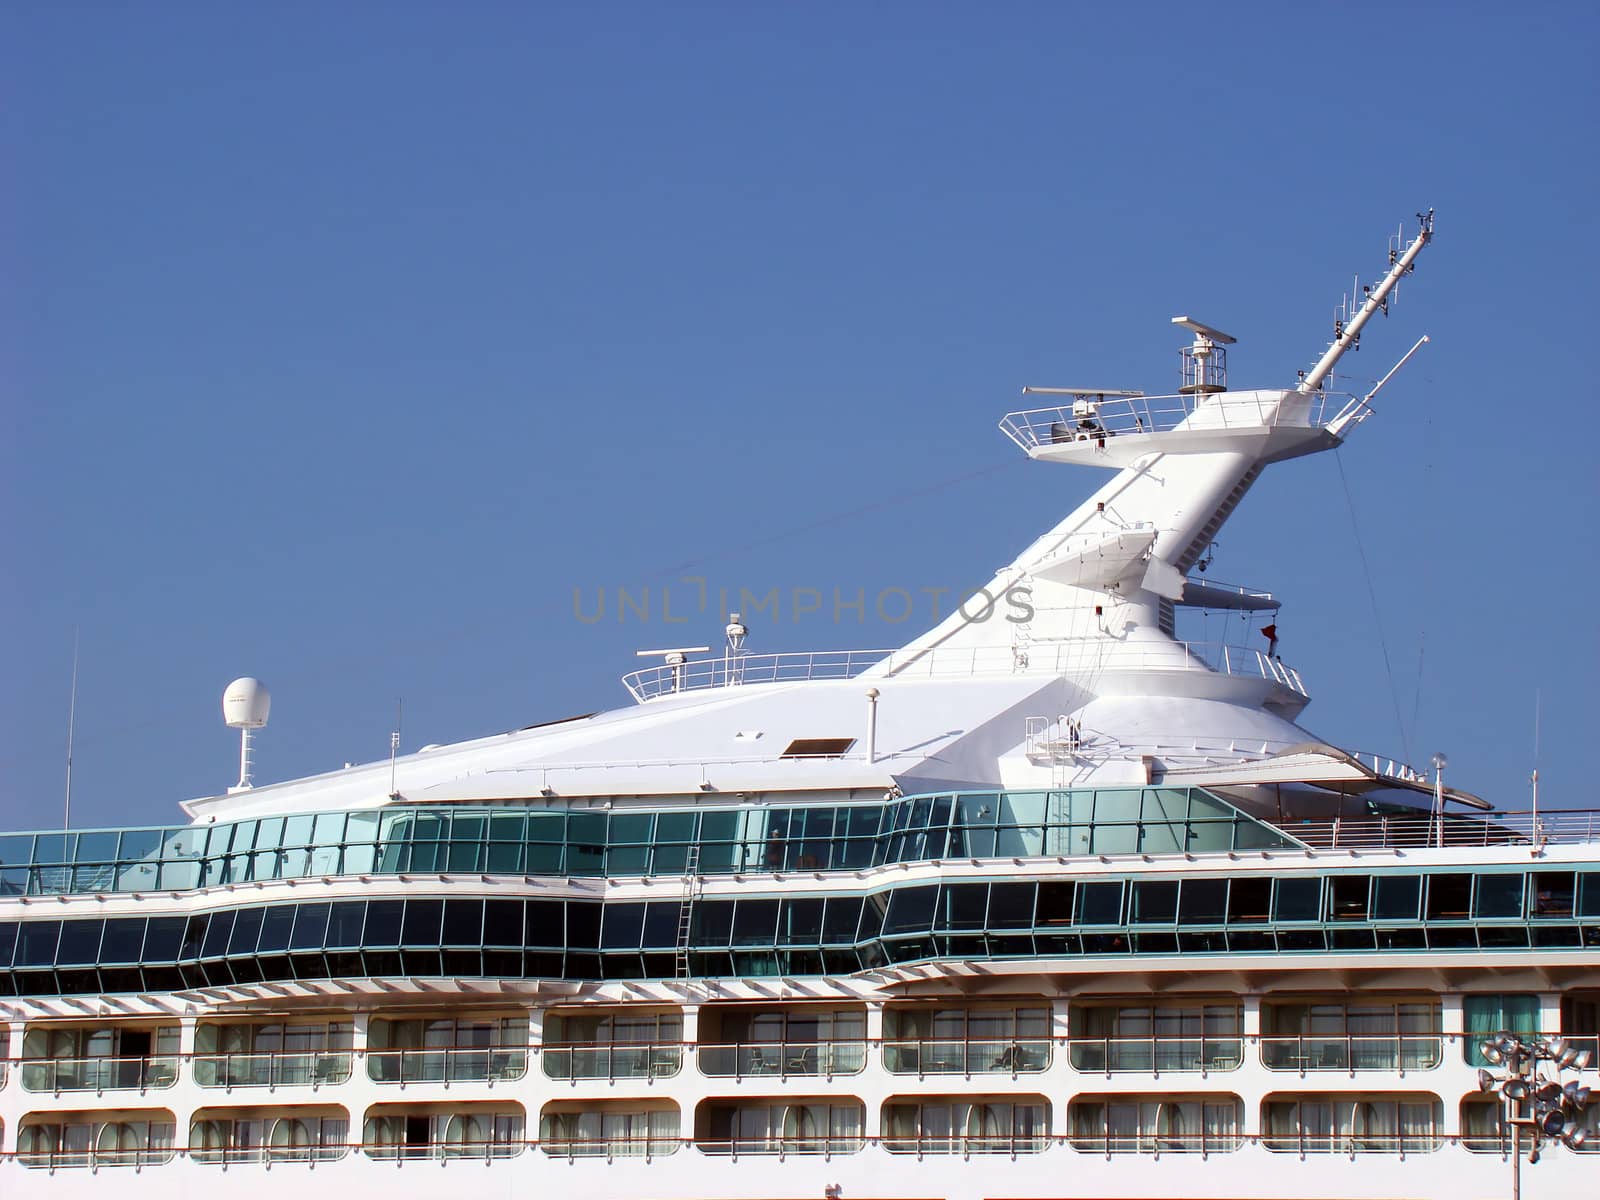 Upper deck of a cruise ship under clear sky.